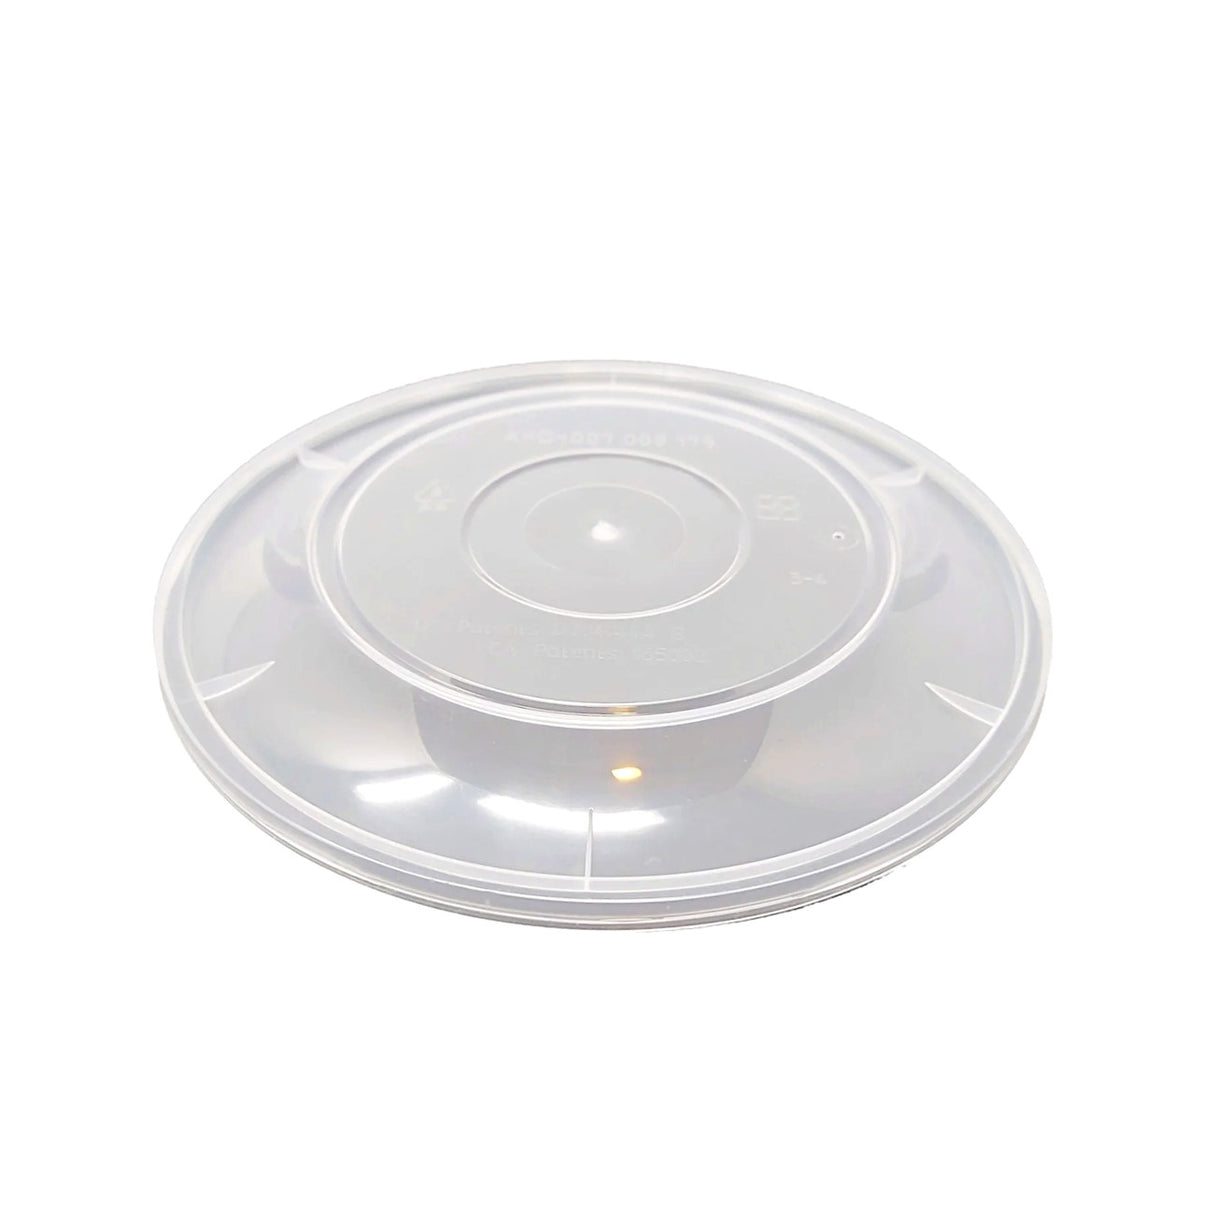 179mm PP Round Dome Lids for 26-38oz Bowls (Lid Only) - 300 Pcs